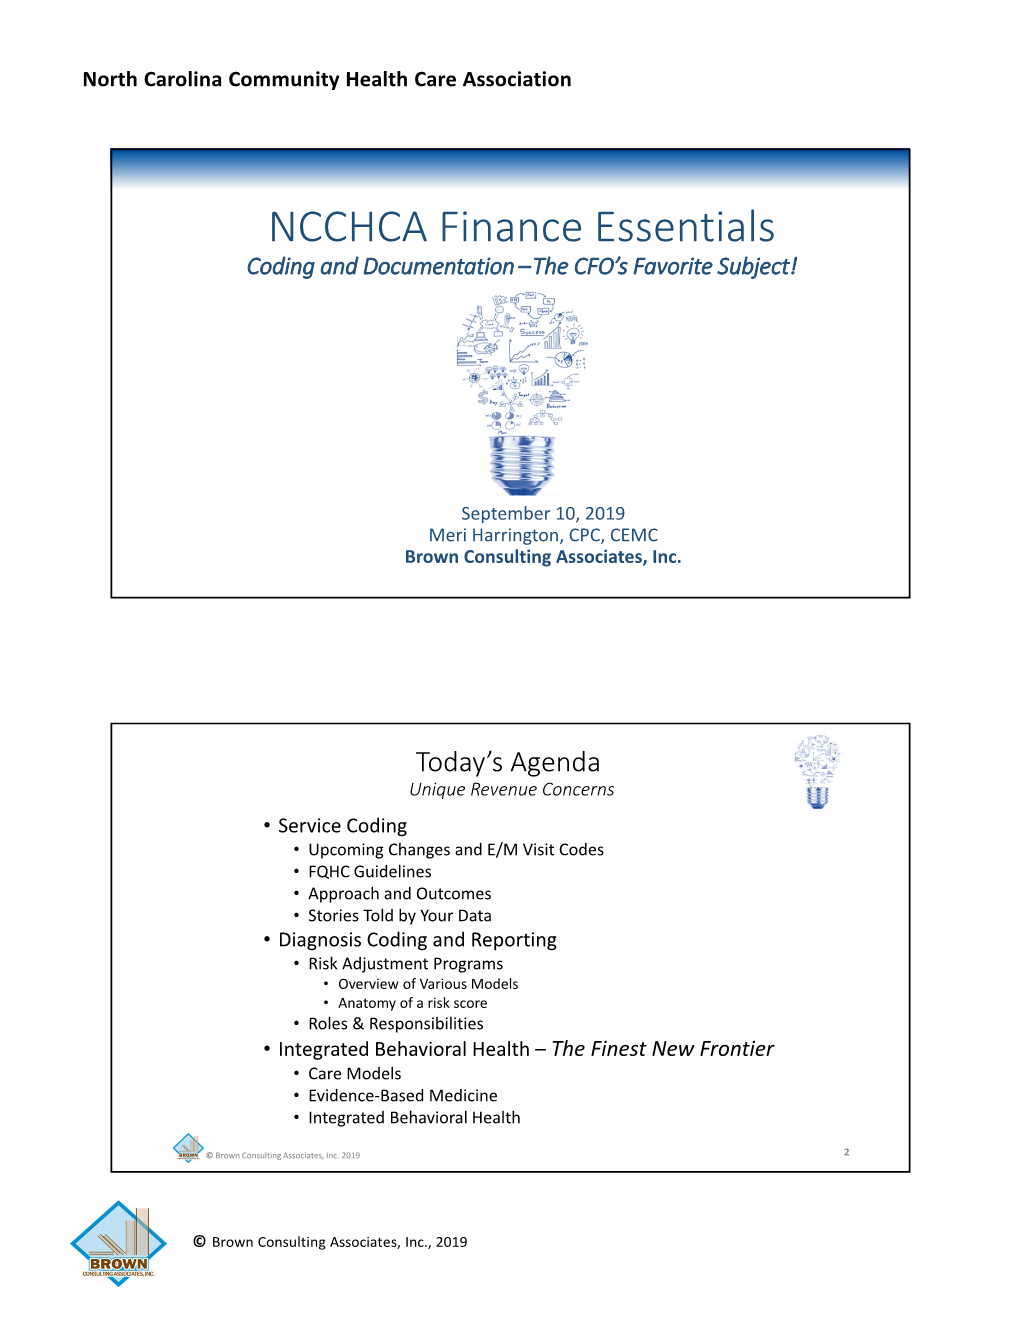 NCCHCA Finance Essentials Coding and Documentation –The CFO’S Favorite Subject!